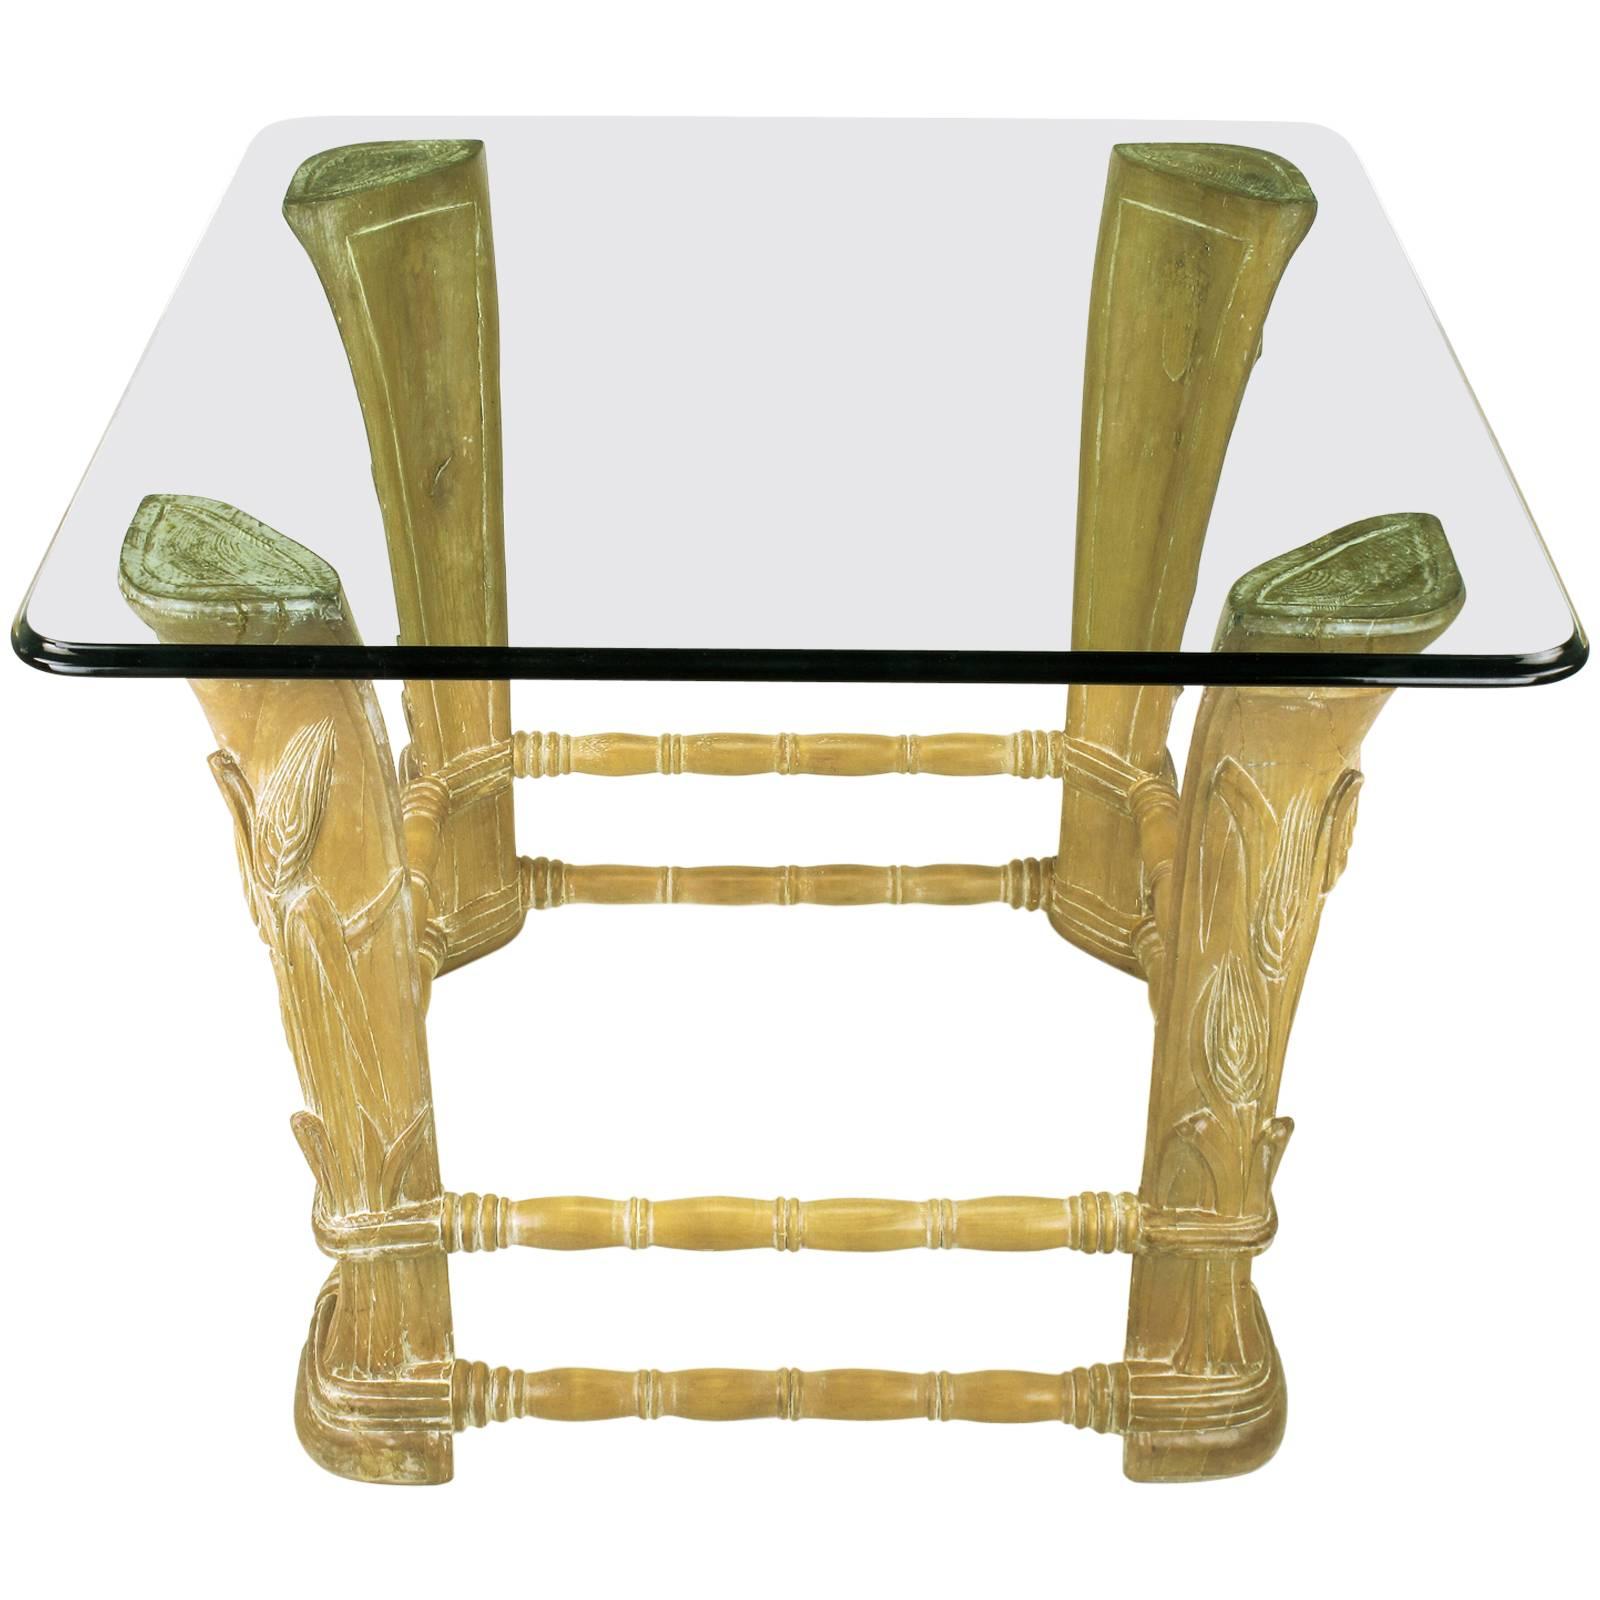 Limed Alder Center Table with Carved Wheat Relief and Glass Top